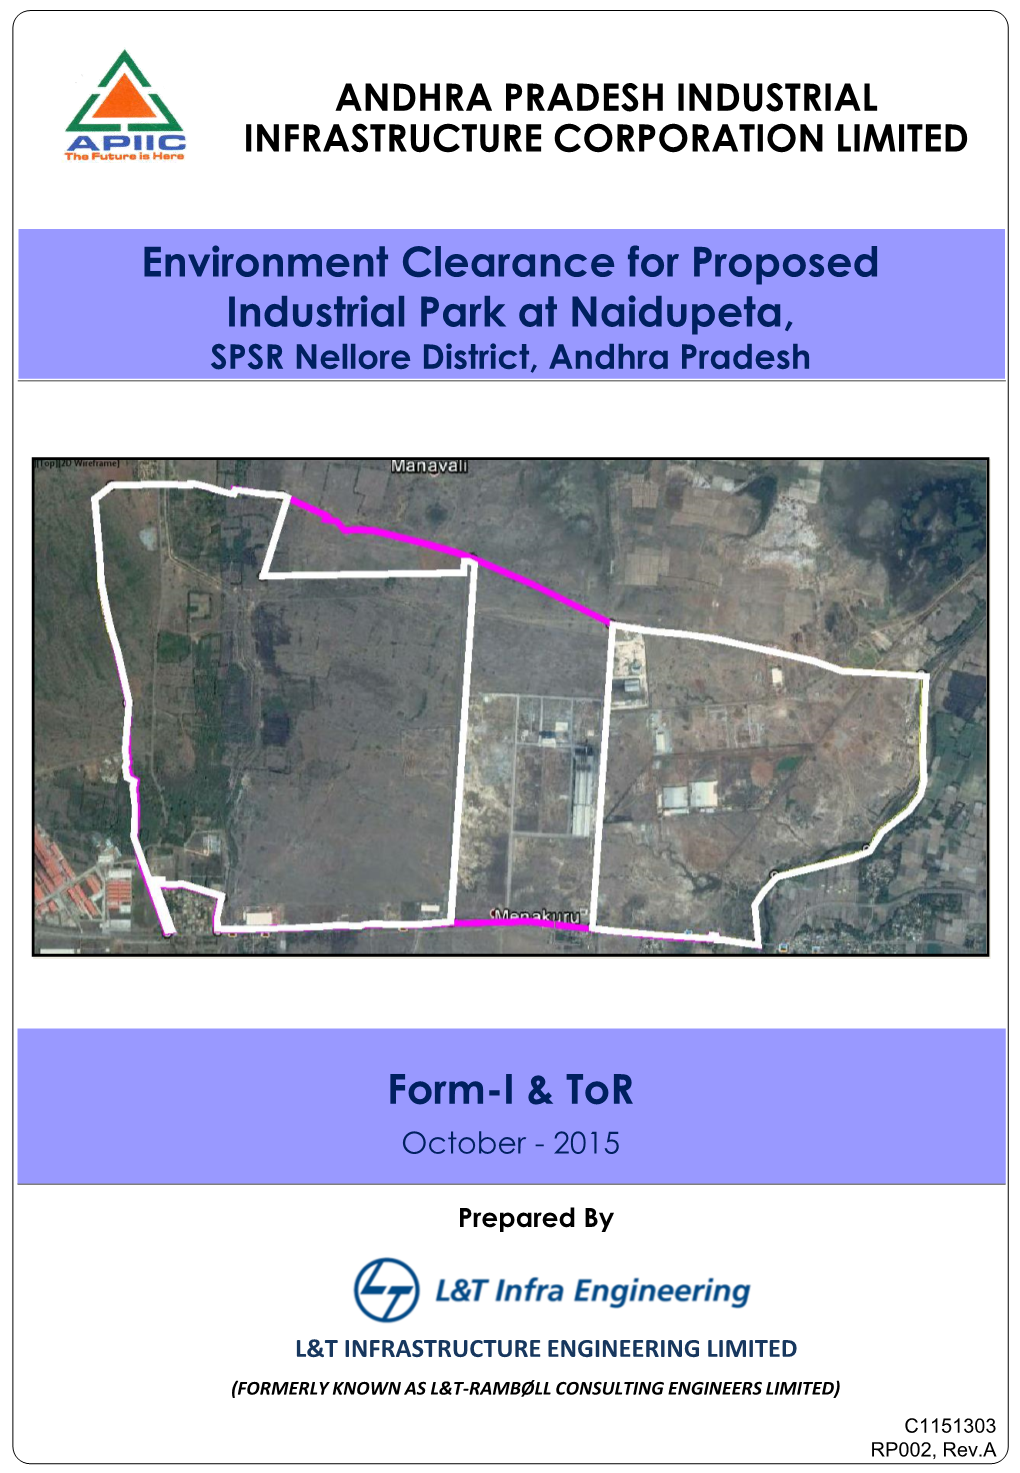 Environment Clearance for Proposed Industrial Park at Naidupeta, SPSR Nellore District, Andhra Pradesh